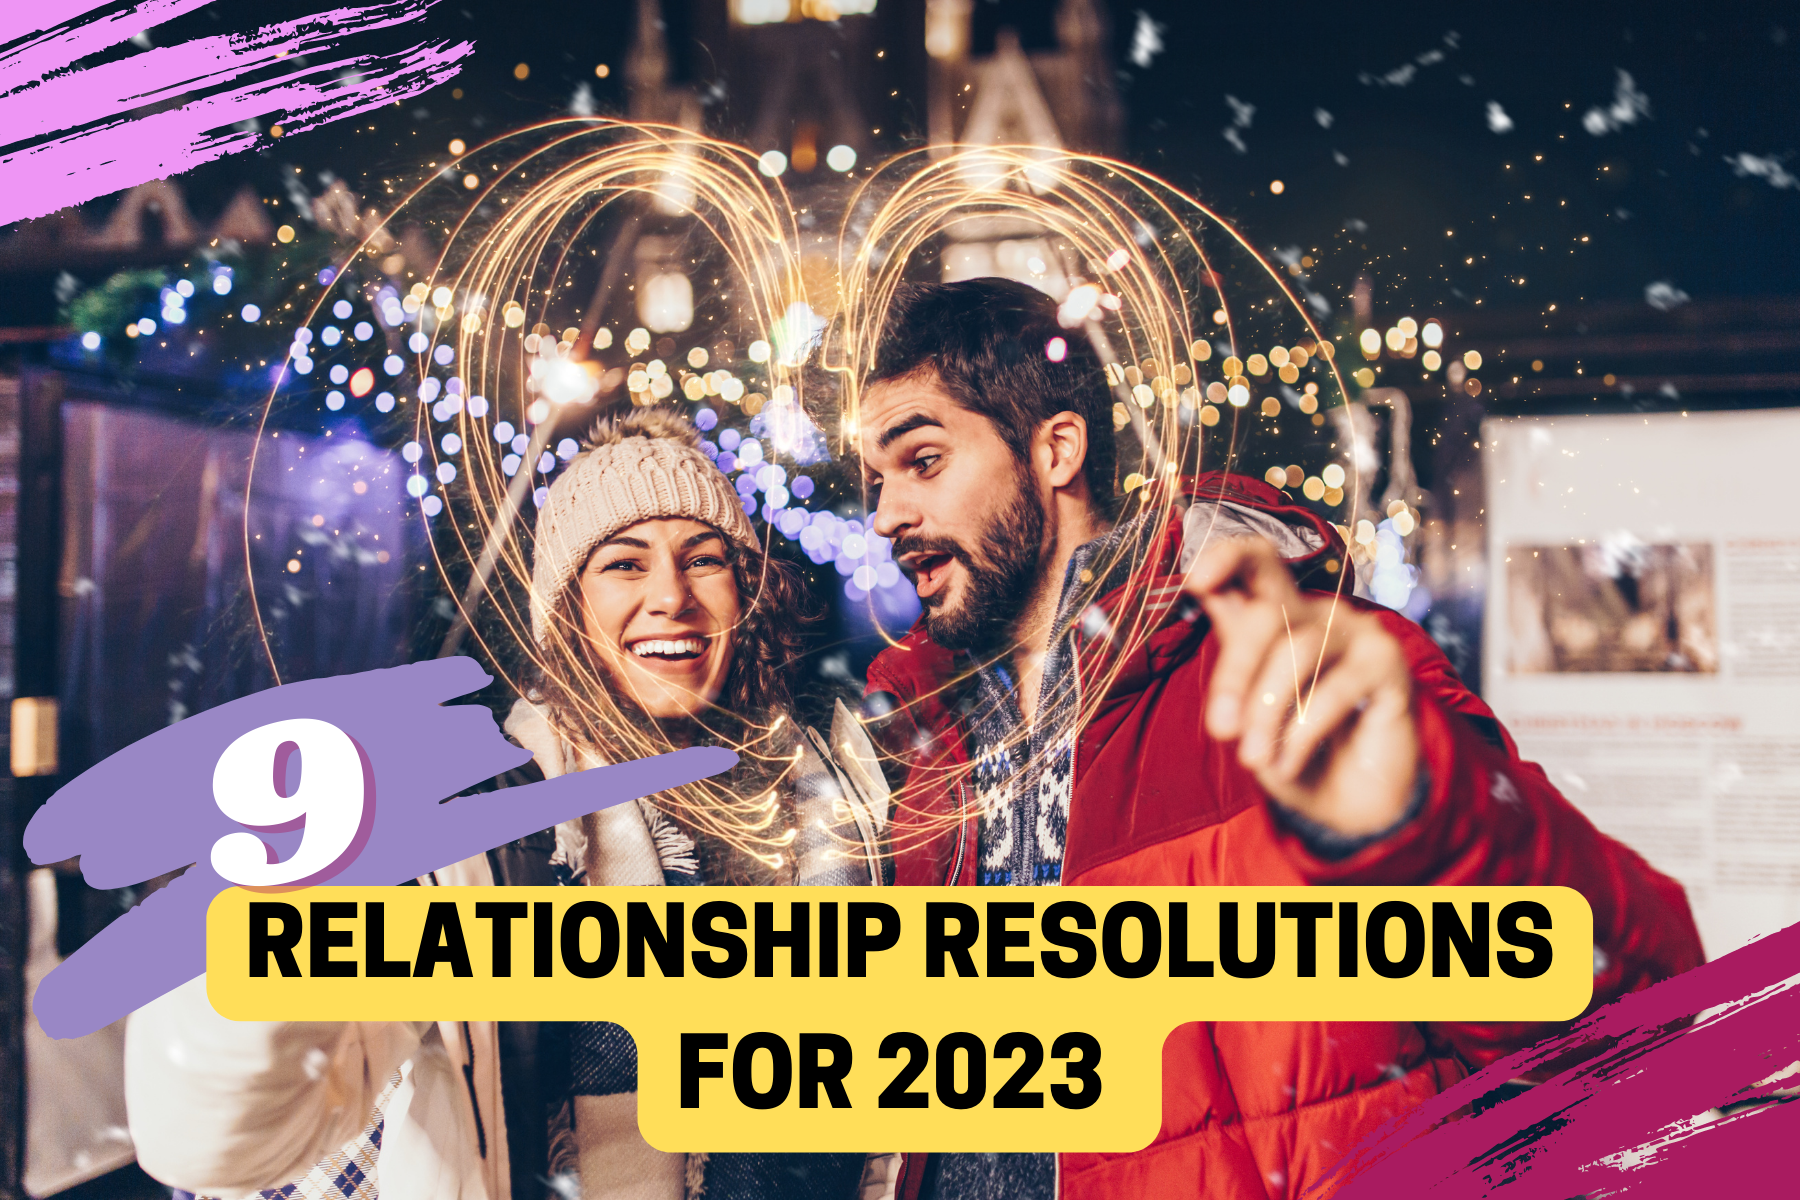 couple celebrating new year's eve 9 relationship resolutions for 2023 dating safety tips